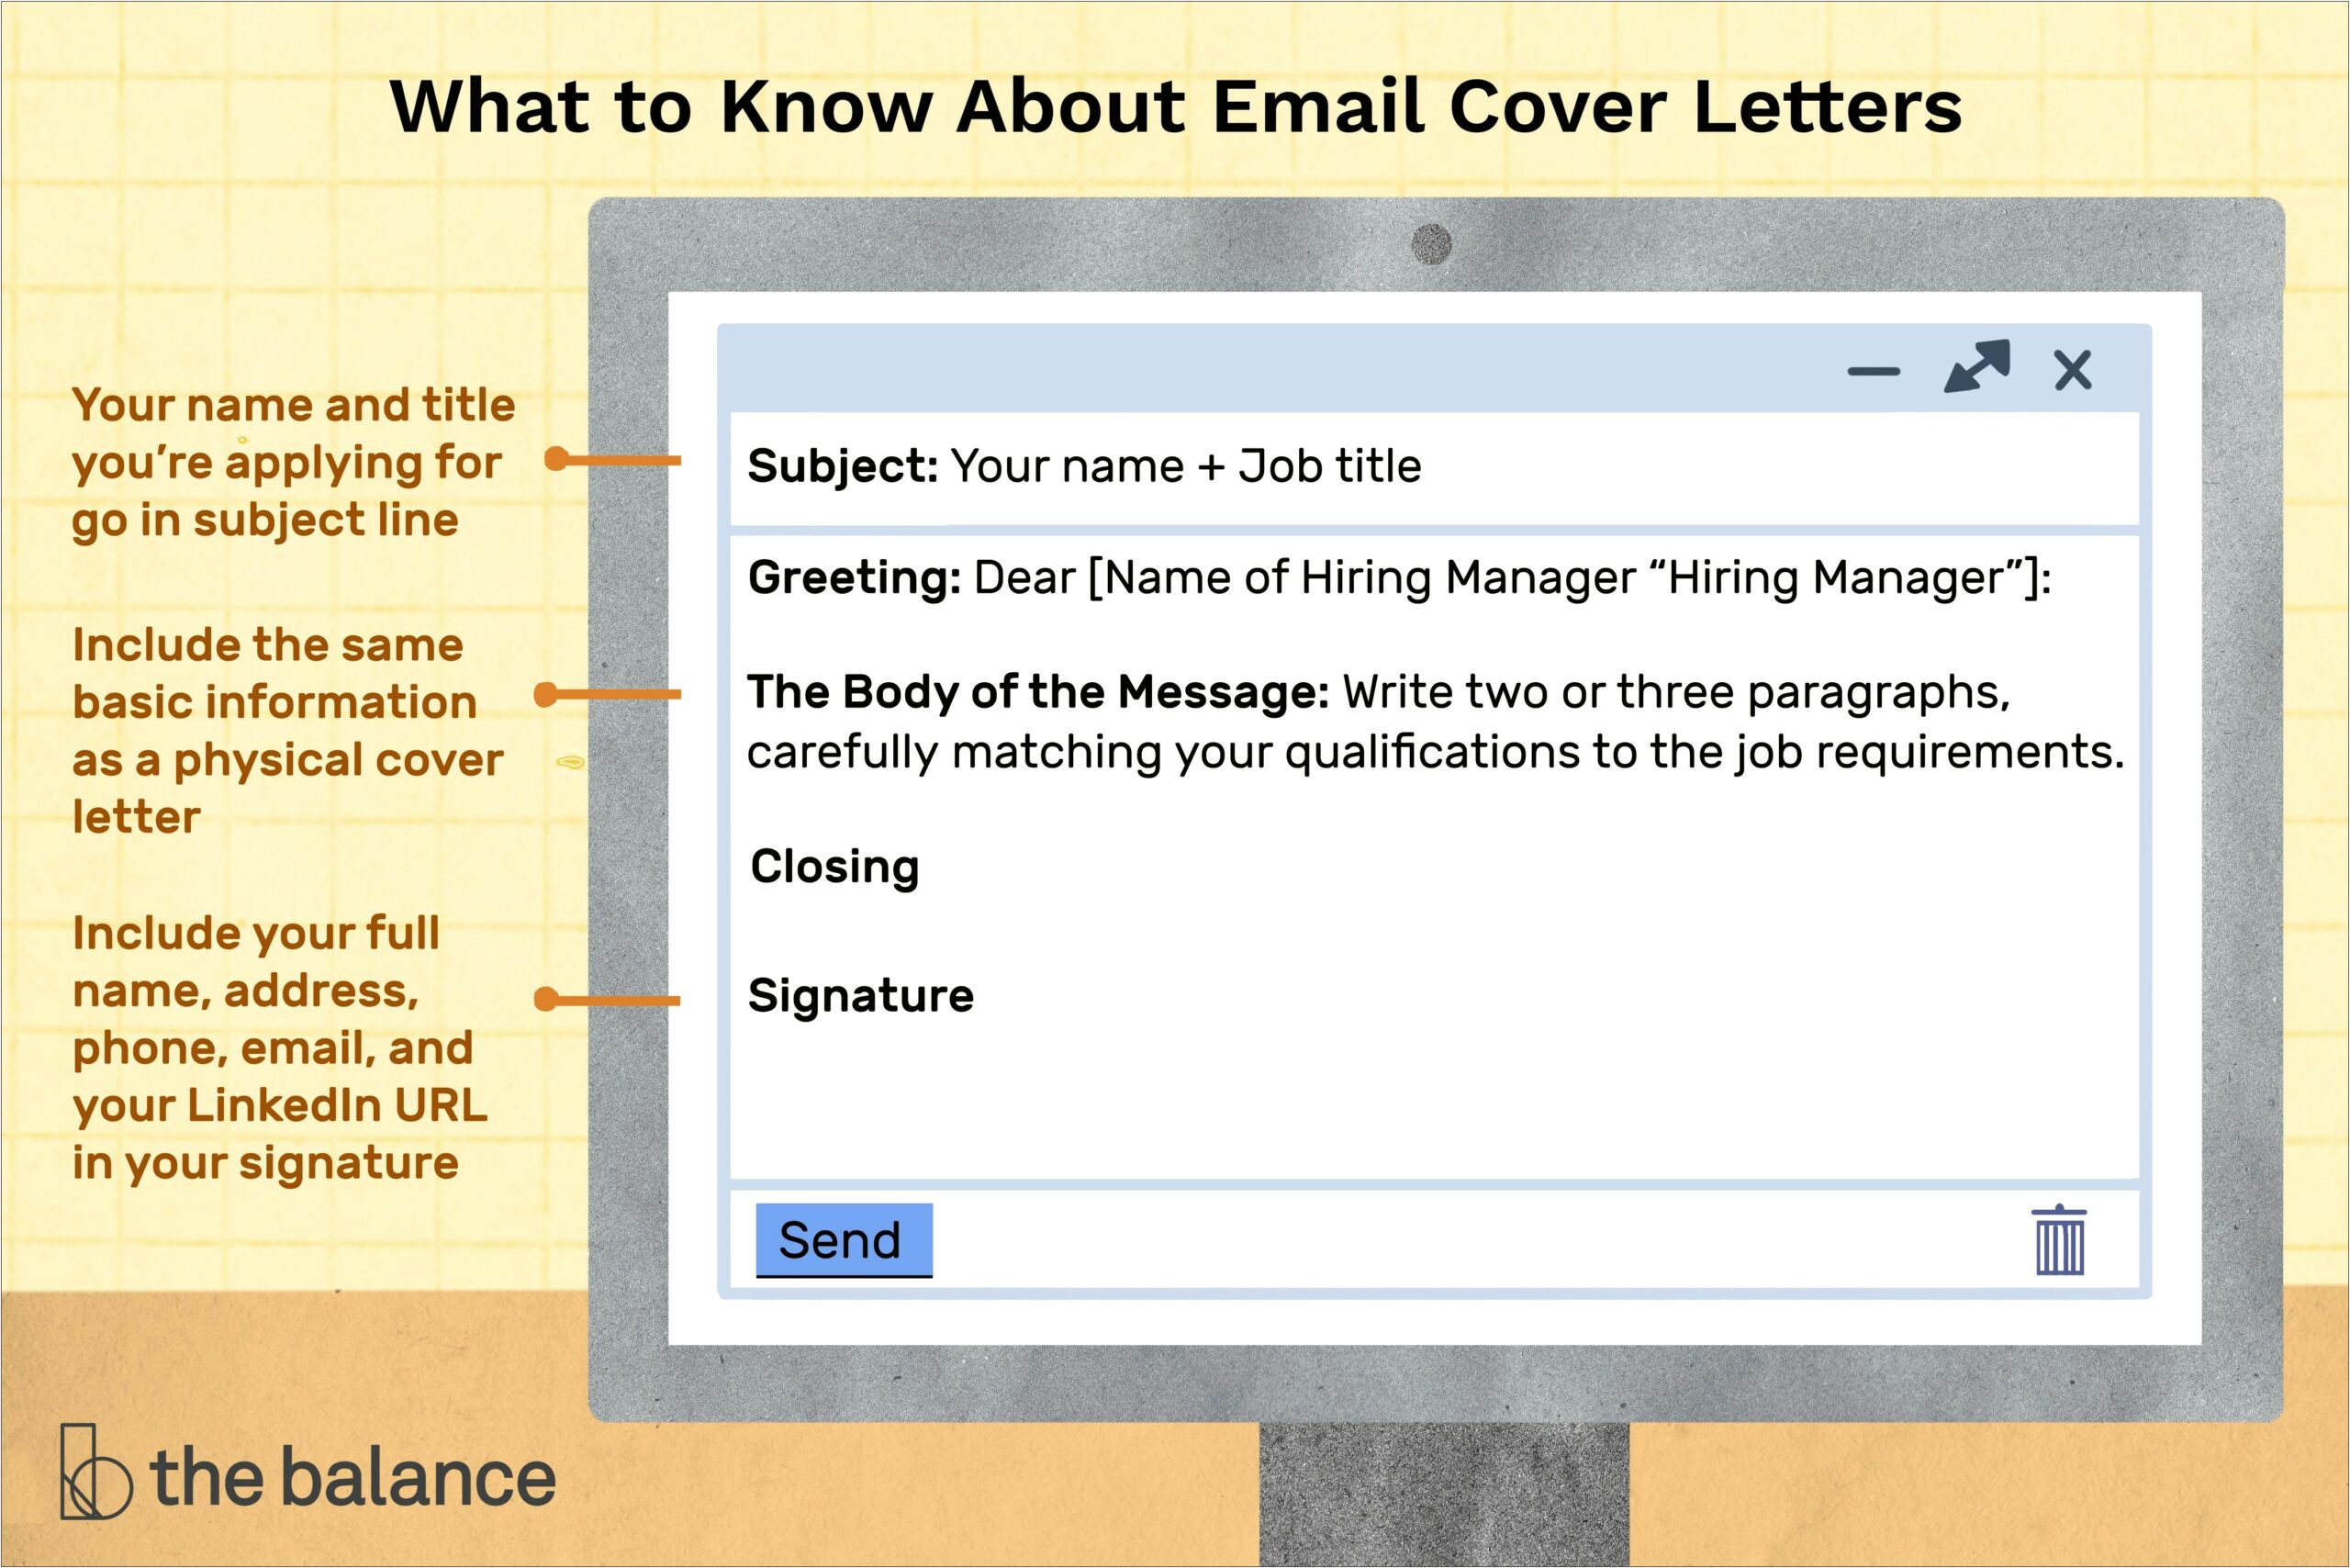 Etiquette For Emailing Resume And Cover Letter